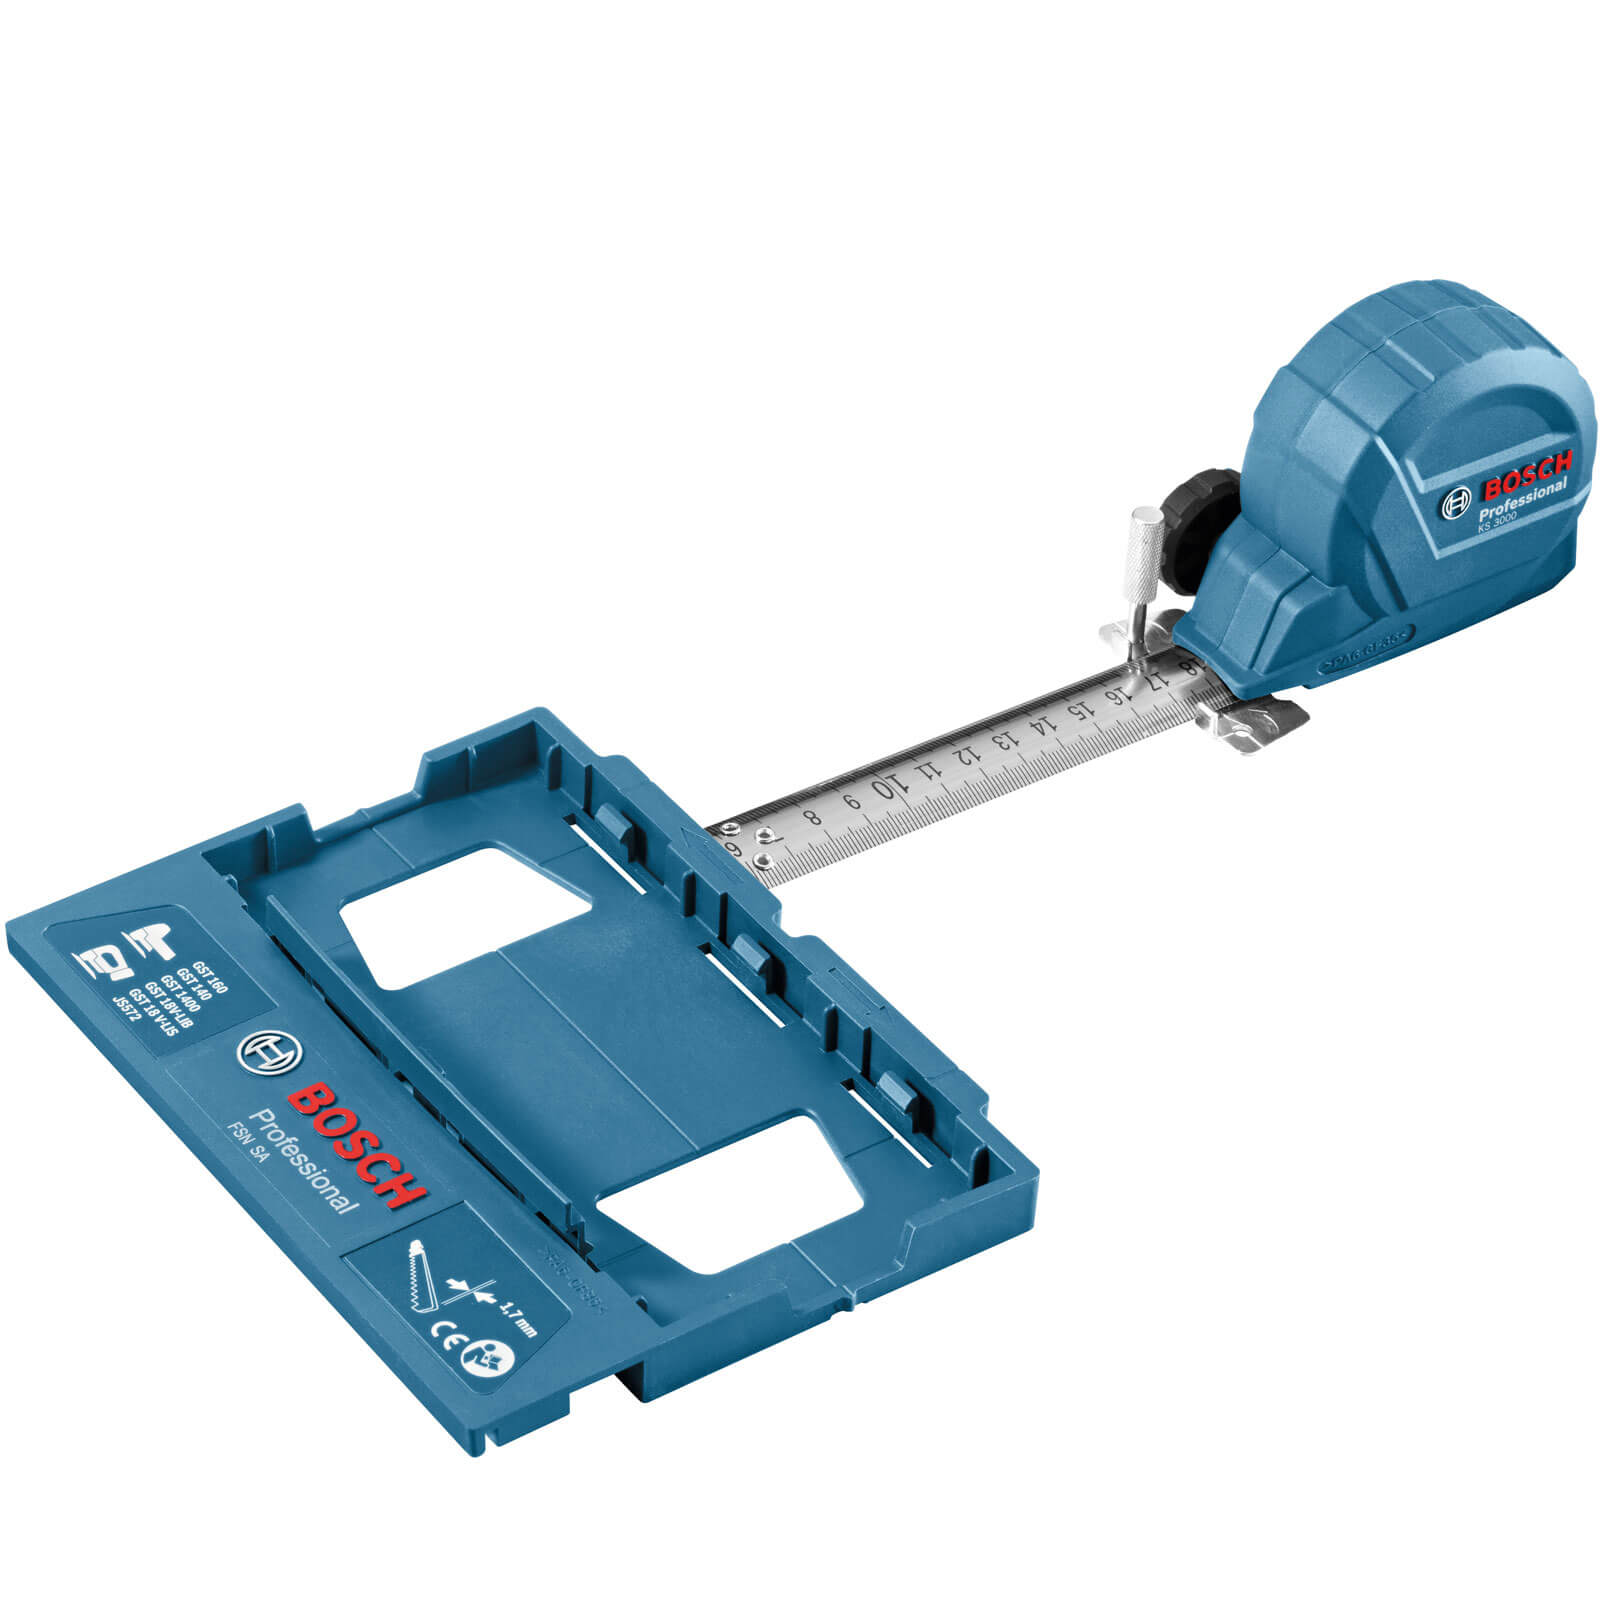 Image of Bosch KS 3000 Jigsaw Jig For Guided Circle Cuts